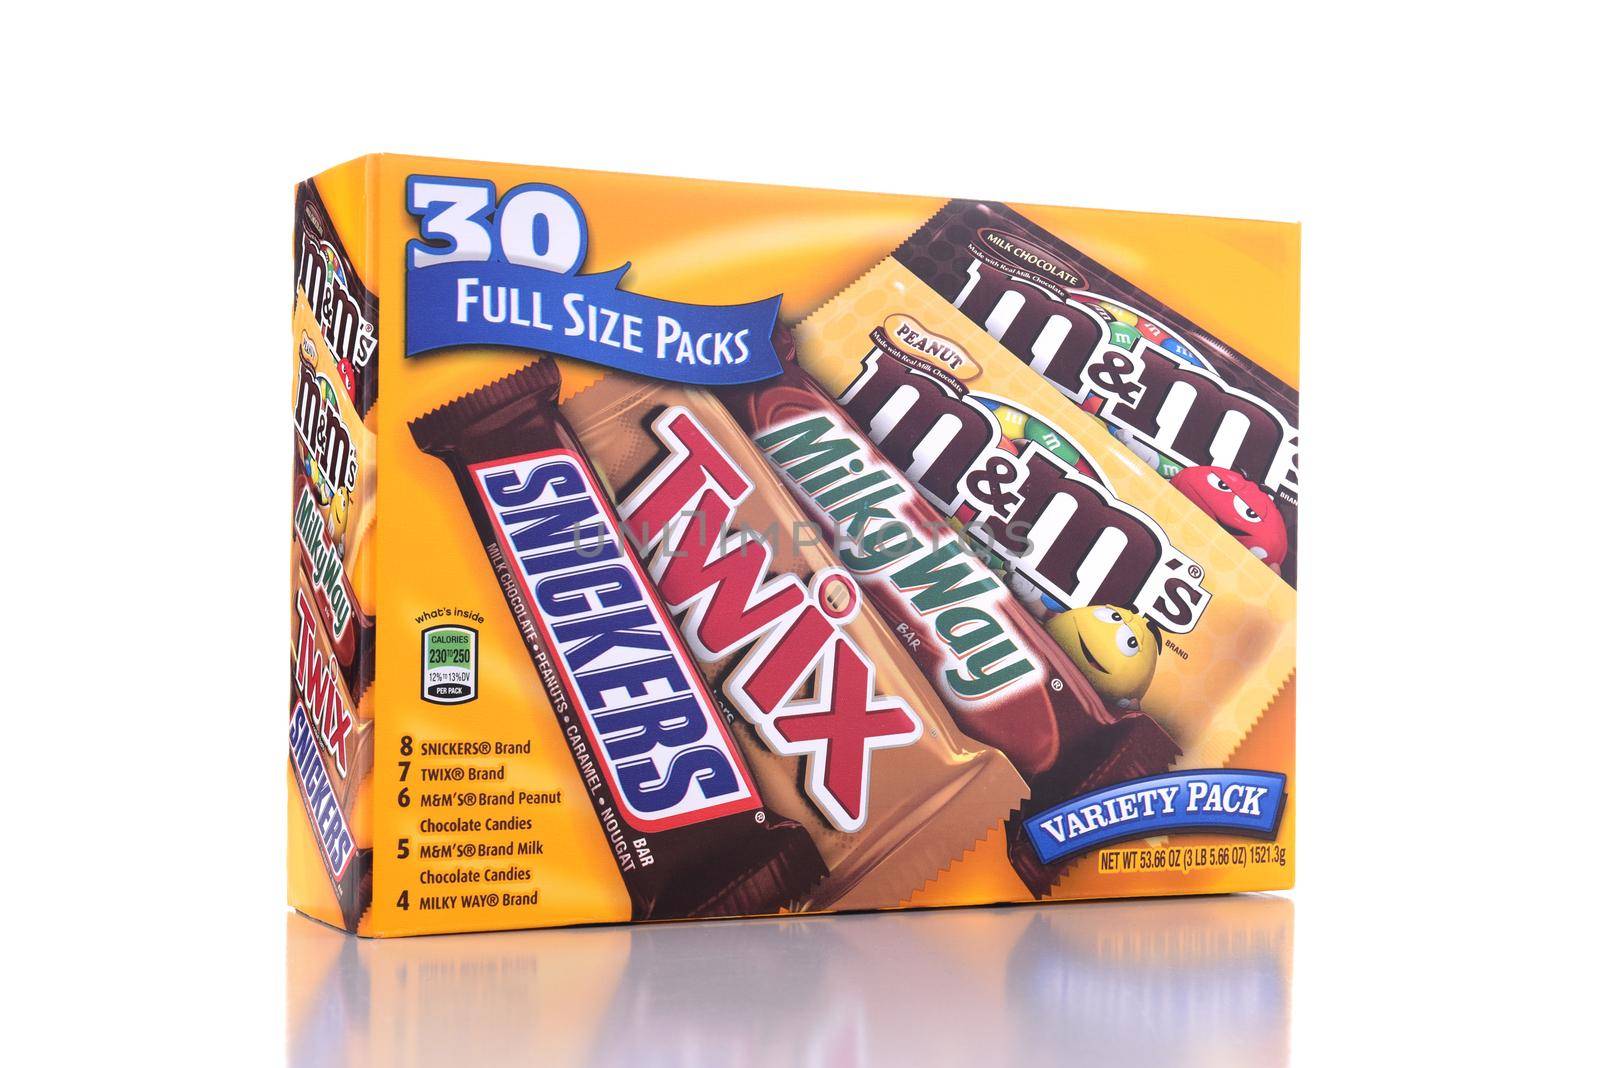 IRVINE, CALIFORNIA - OCTOBER 12, 2018: A 30 count box of assorted full size candy bars from Mars Chocolate. 